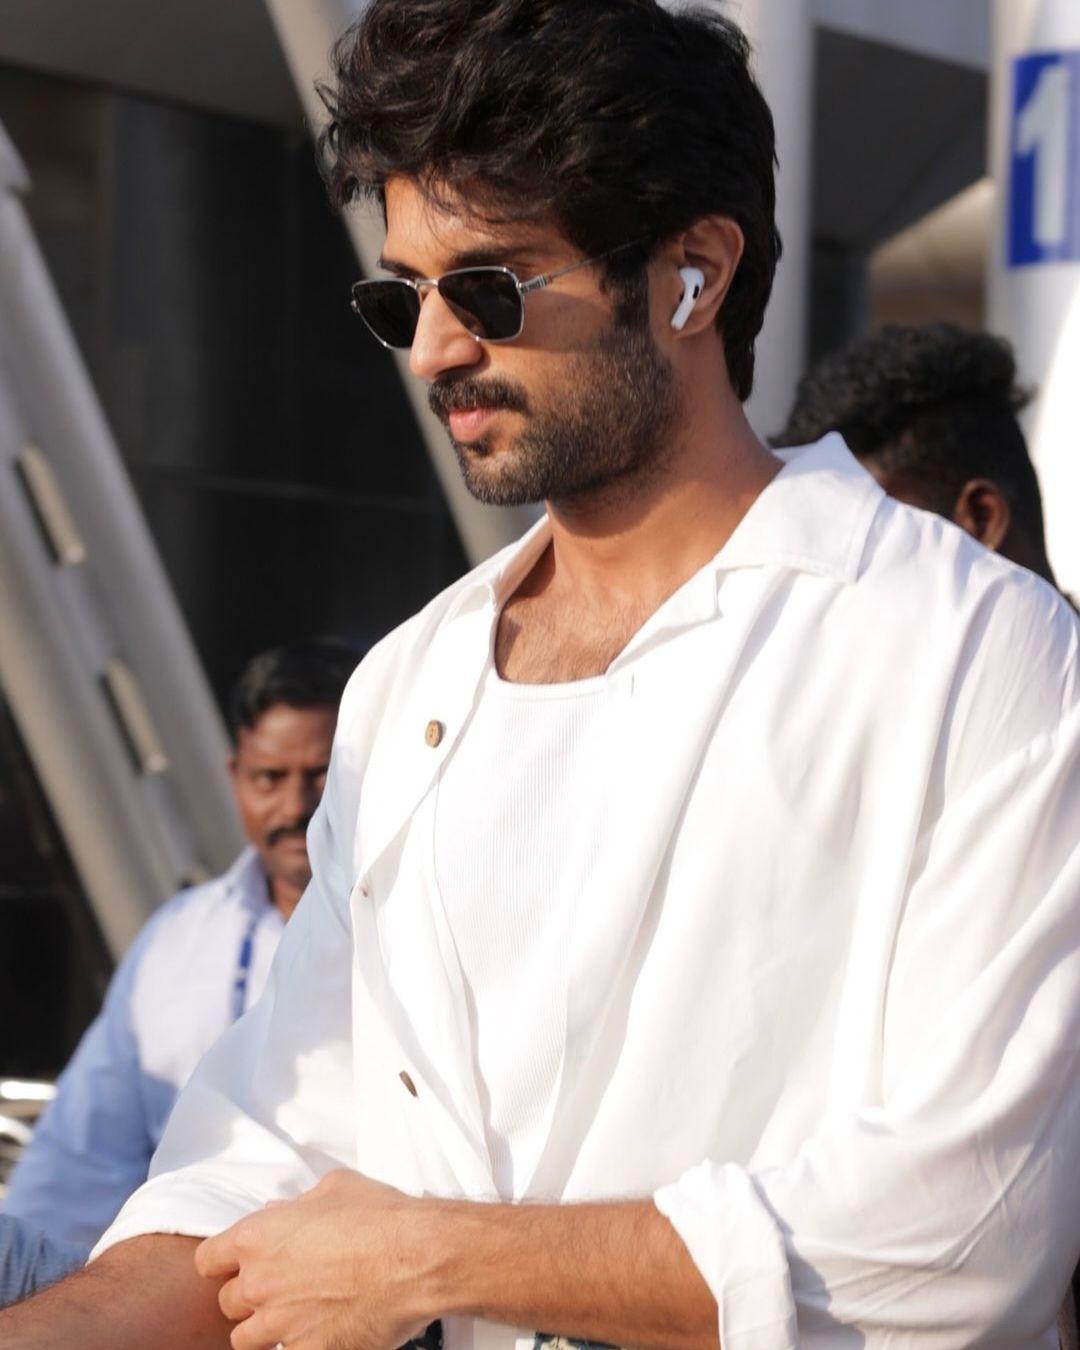 Vijay Deverakonda's summer look is effortlessly cool with a loose, unbuttoned white shirt layered over a crisp white undershirt.